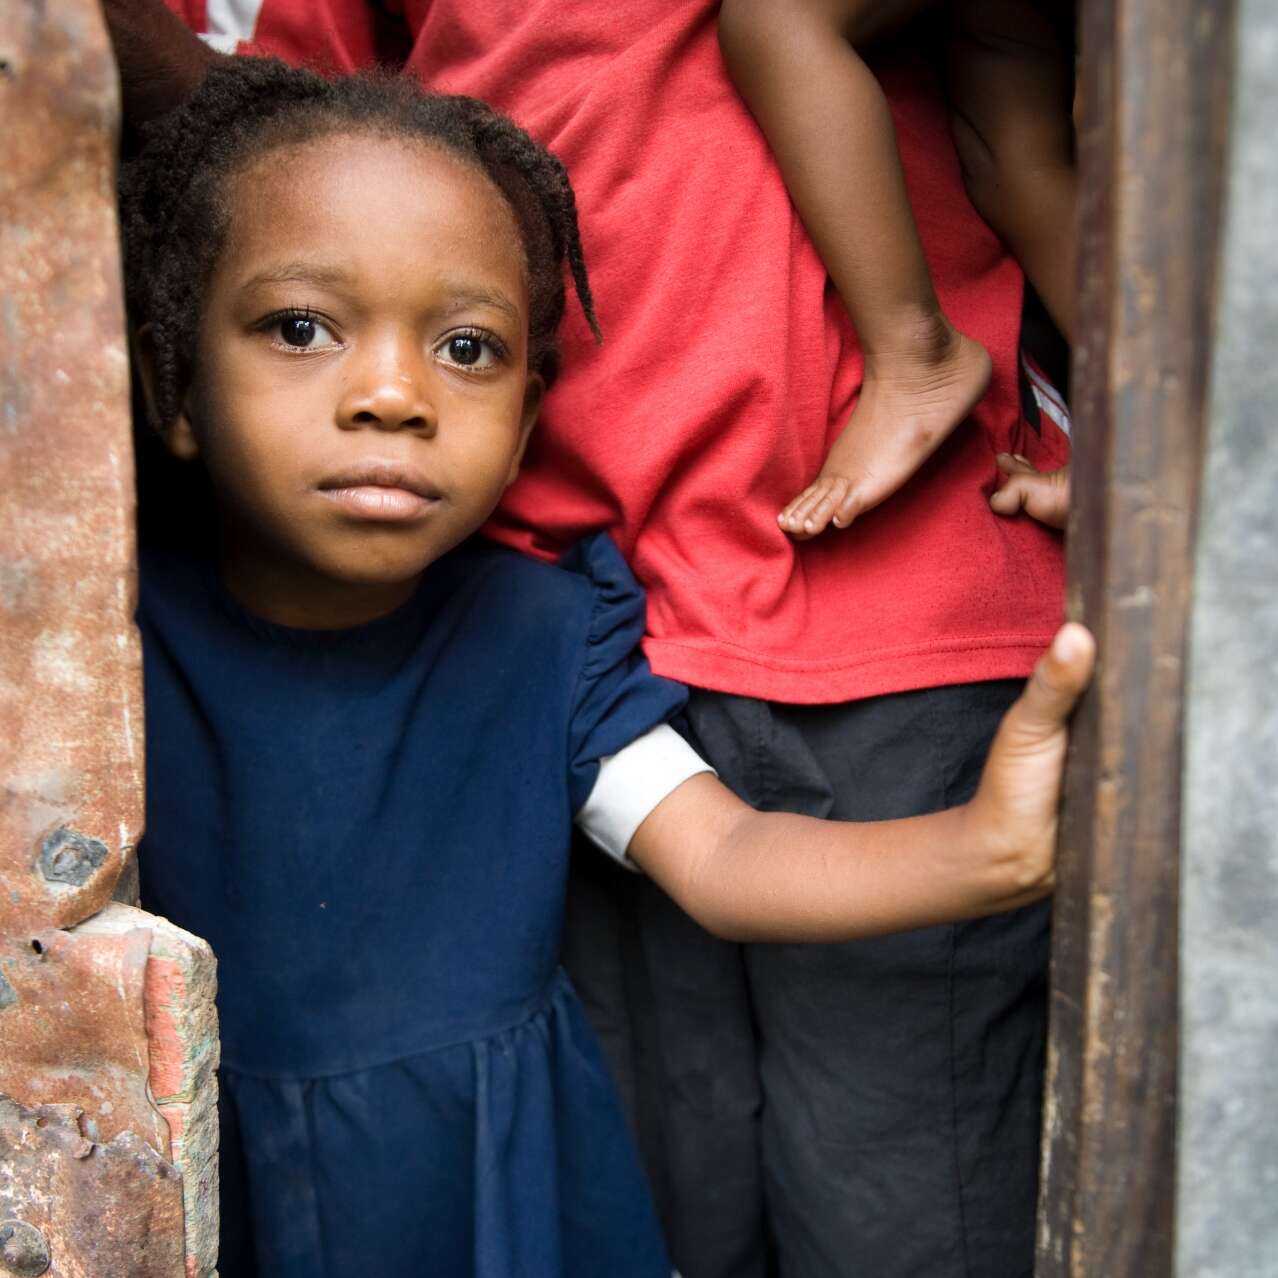 A young girl stands in a doorway in Haiti, looking at the camera